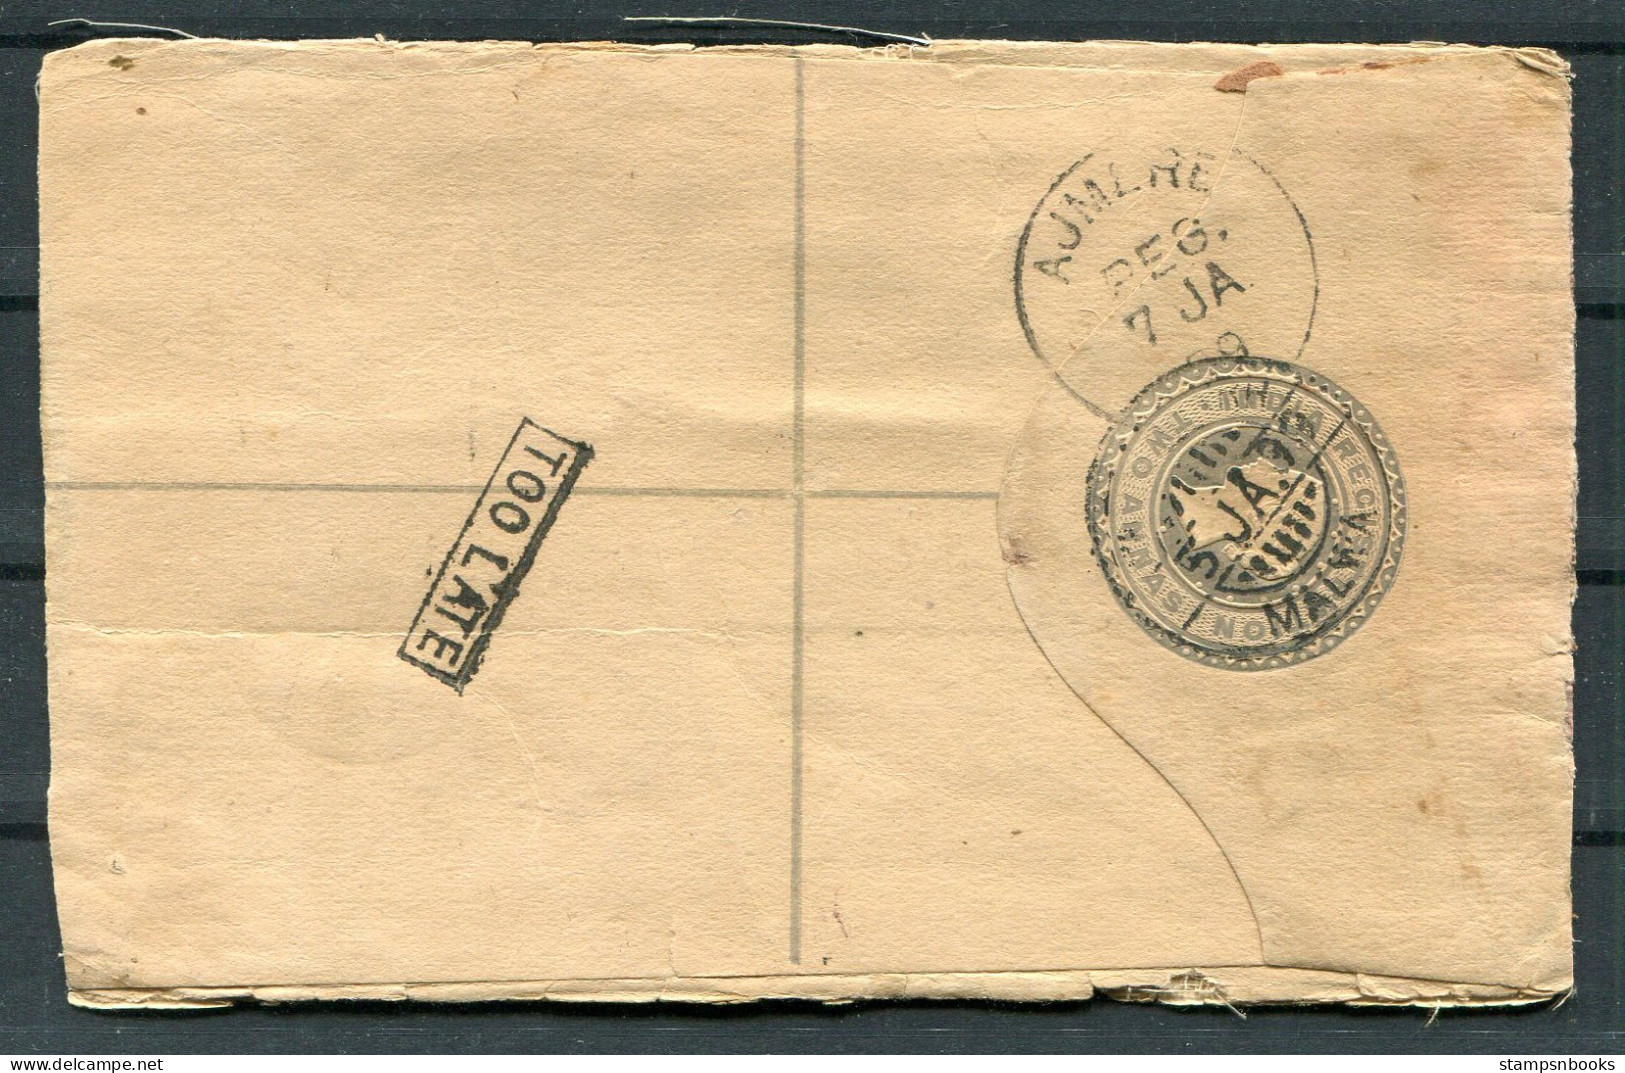 1899 India Registered Letter Stationery Malwa - Ajmere, Boxed "TOO LATE" - 1882-1901 Empire